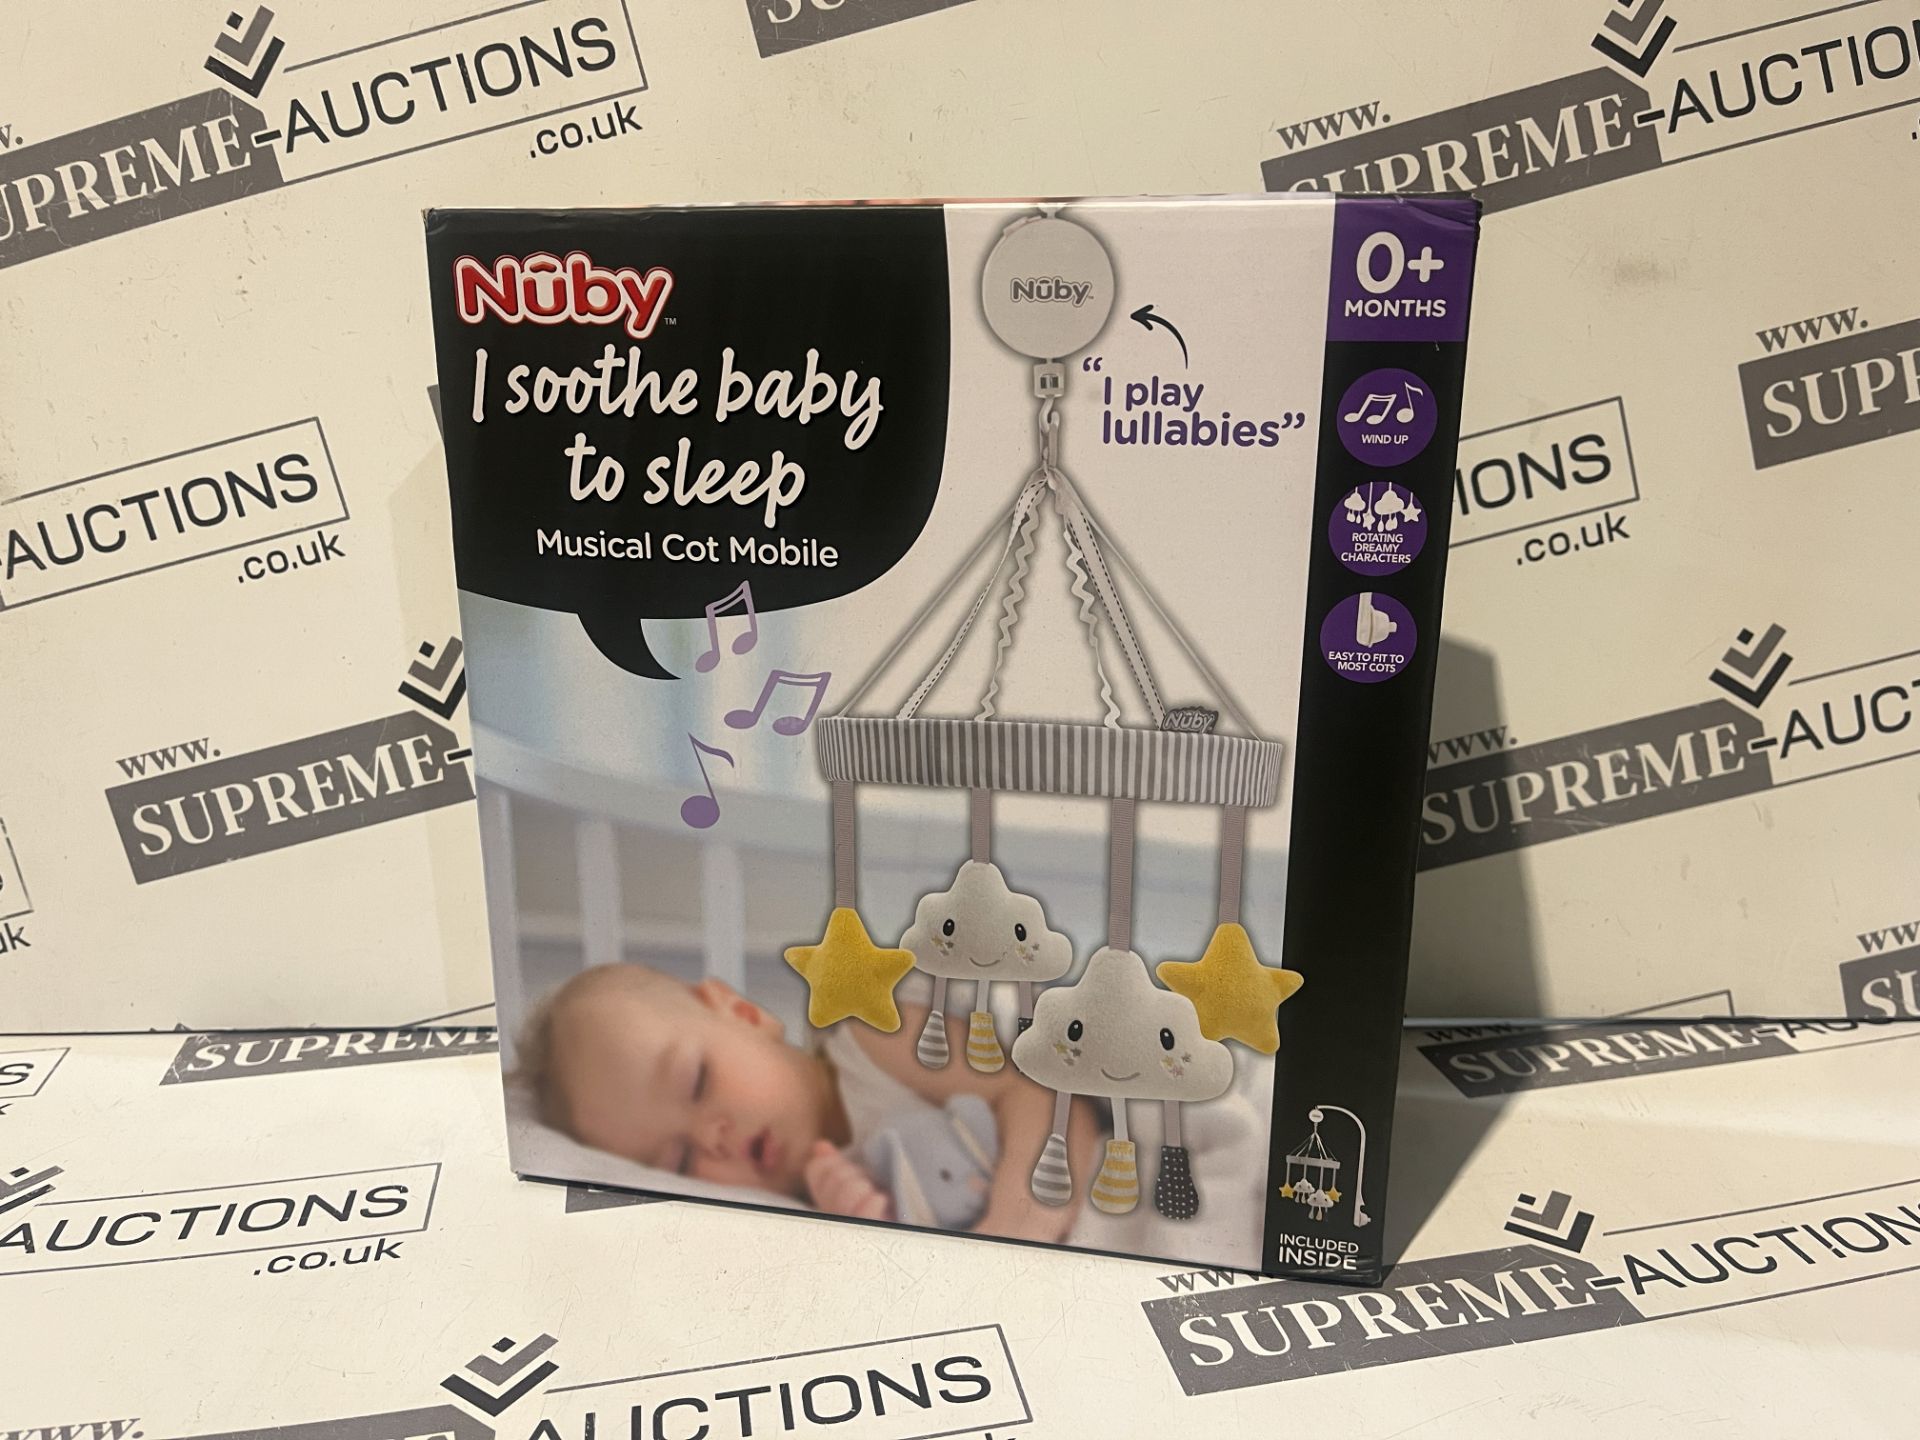 4 X NUBY MUSICAL COT MOBILE, SOOTHES BABY TO SLEEP R15-11